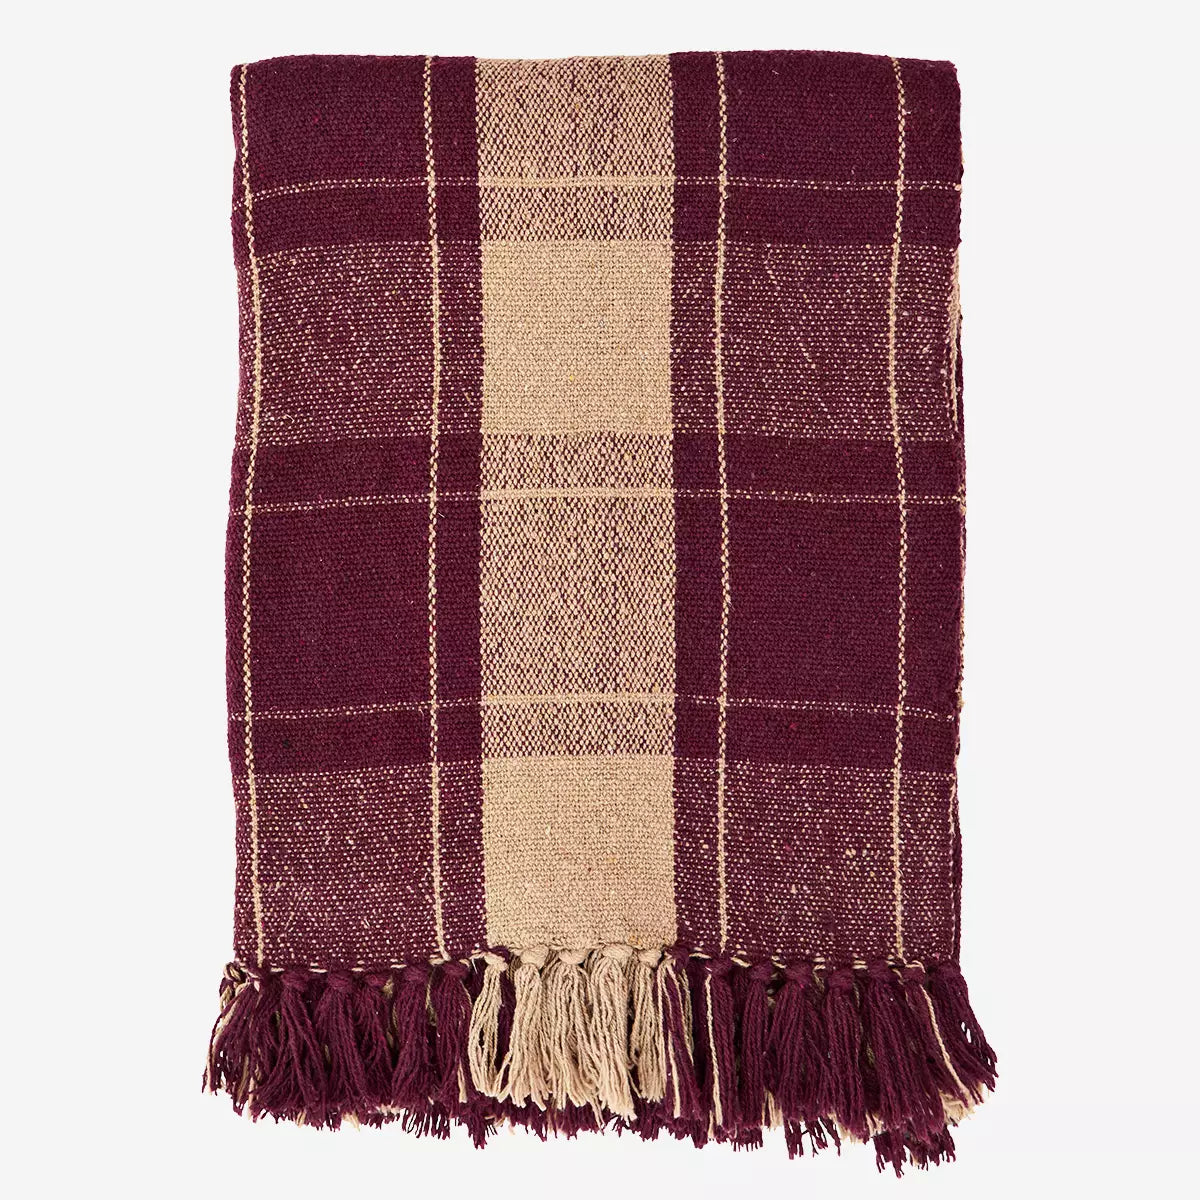 Rich Cream & Burgundy Woven Recycled Cotton Throw